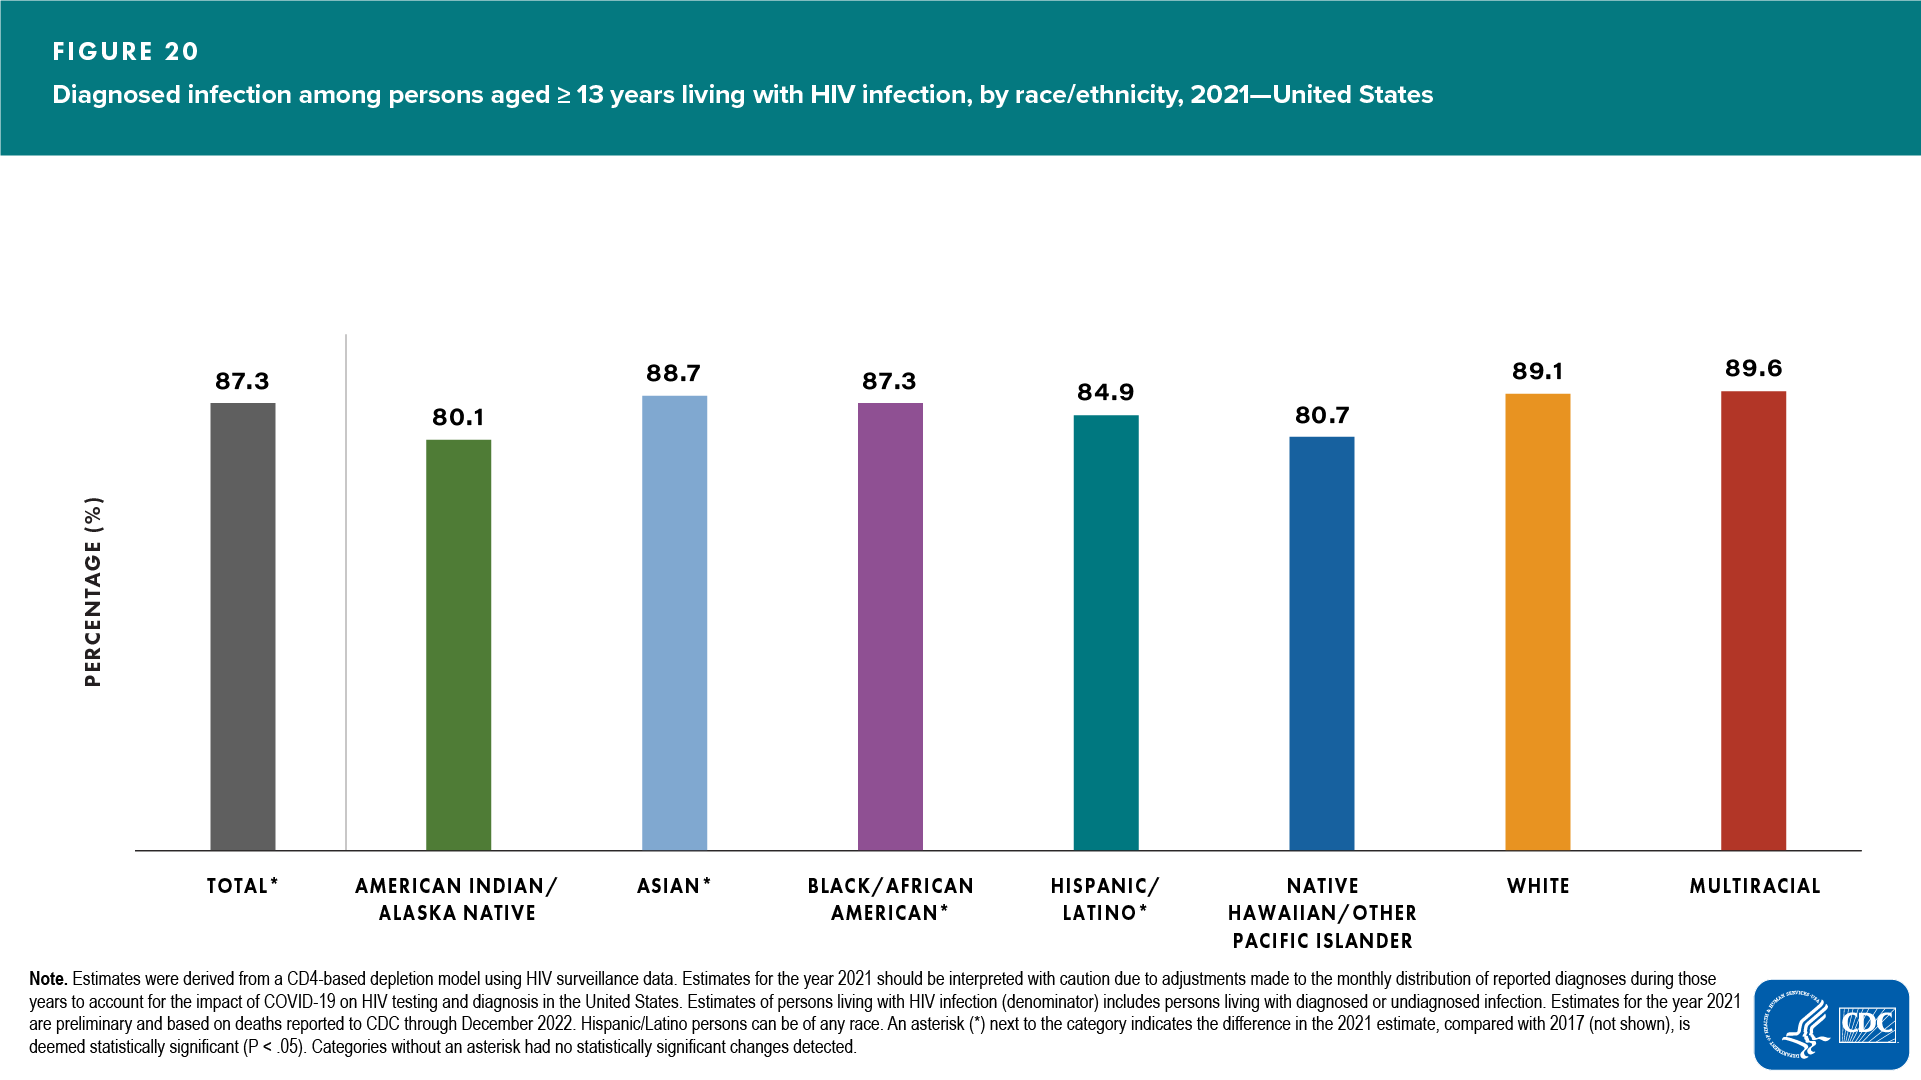 Figure 20. Diagnosed infection among persons aged ≥13 years living with HIV infection, by race/ethnicity, 2021—United States